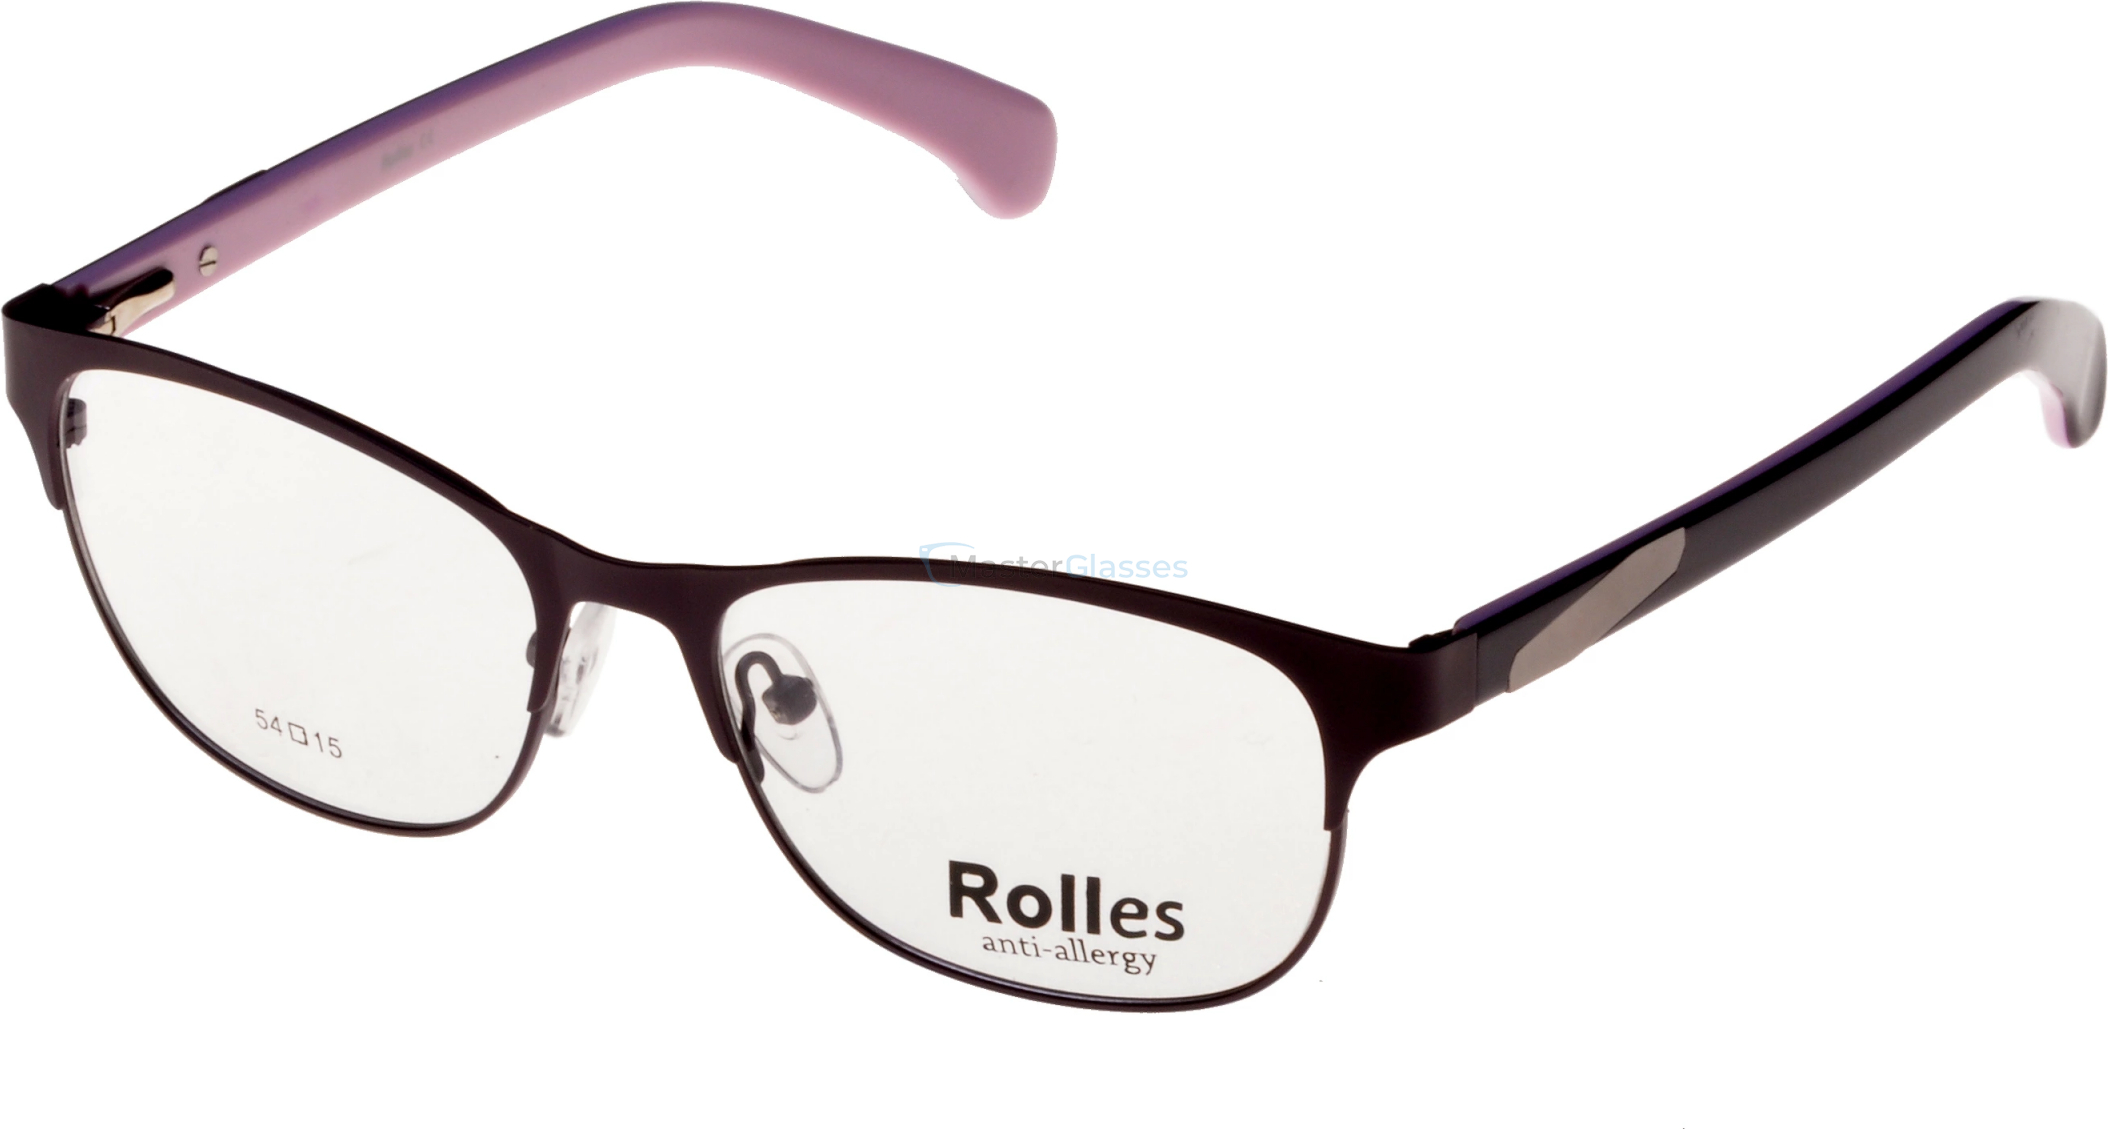  Rolles 476 02